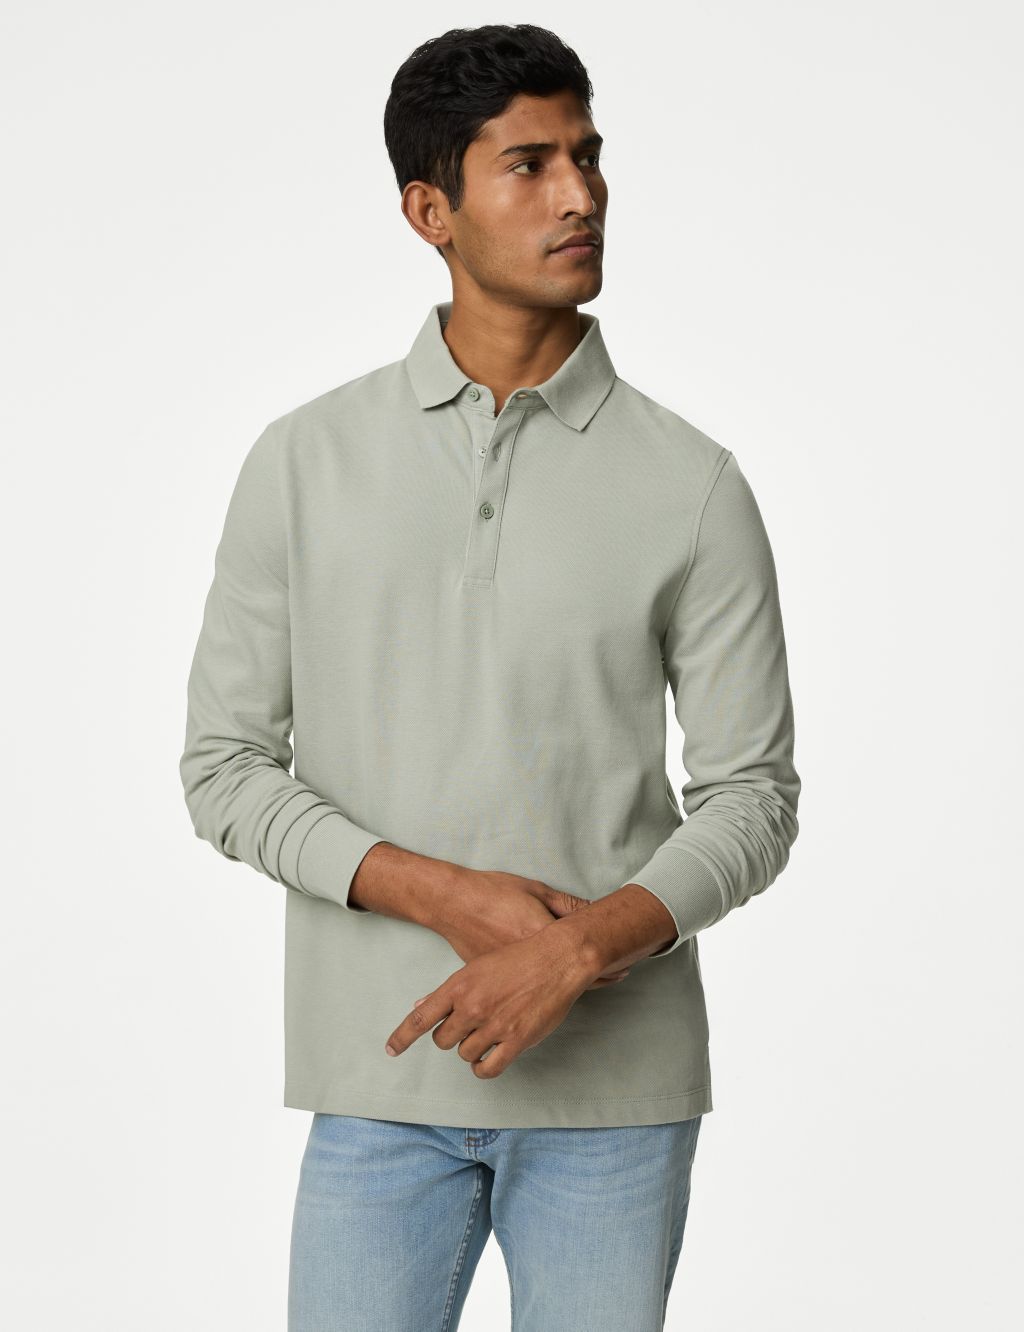 Long-sleeved Men’s Polo Shirts | M&S